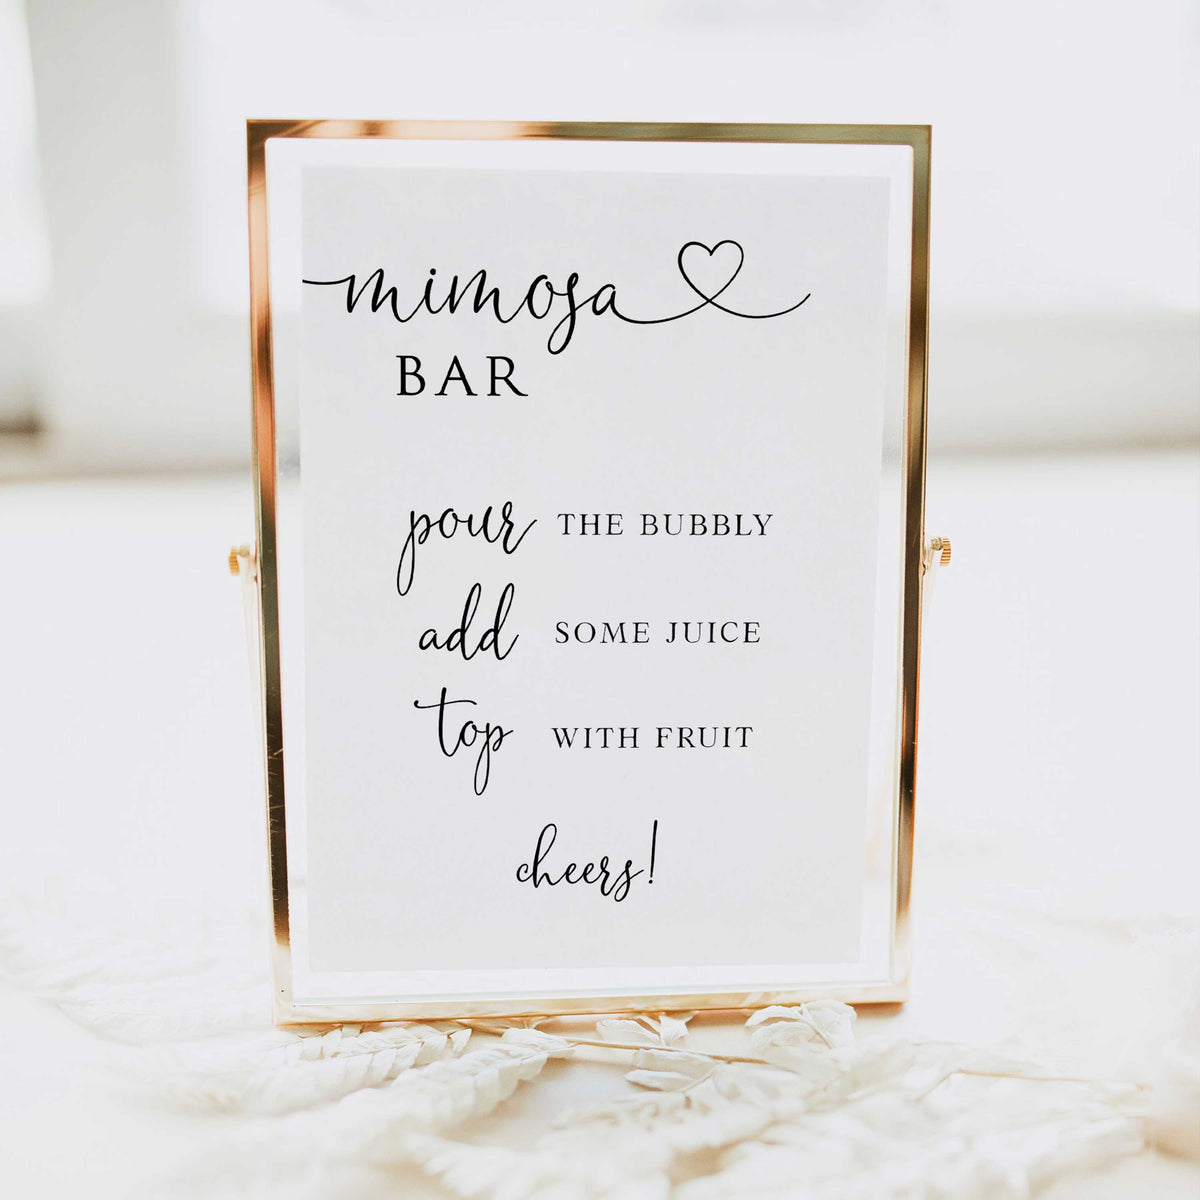 Colorful Flowers Mimosa Bar Sign - Bridal Shower Sign - Party Sign